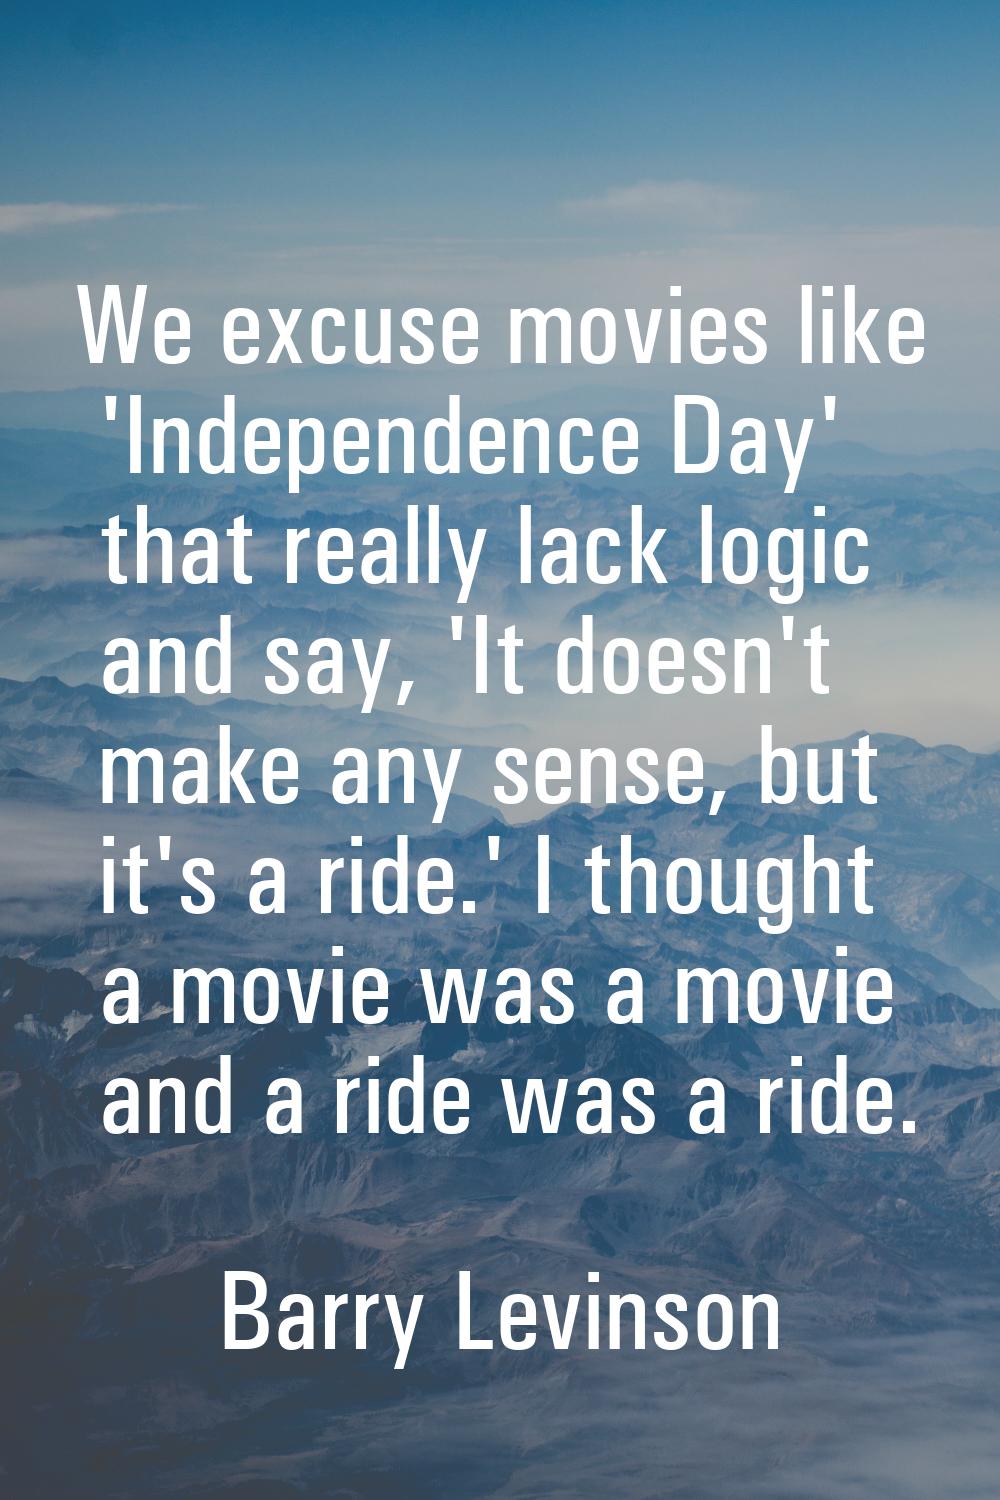 We excuse movies like 'Independence Day' that really lack logic and say, 'It doesn't make any sense